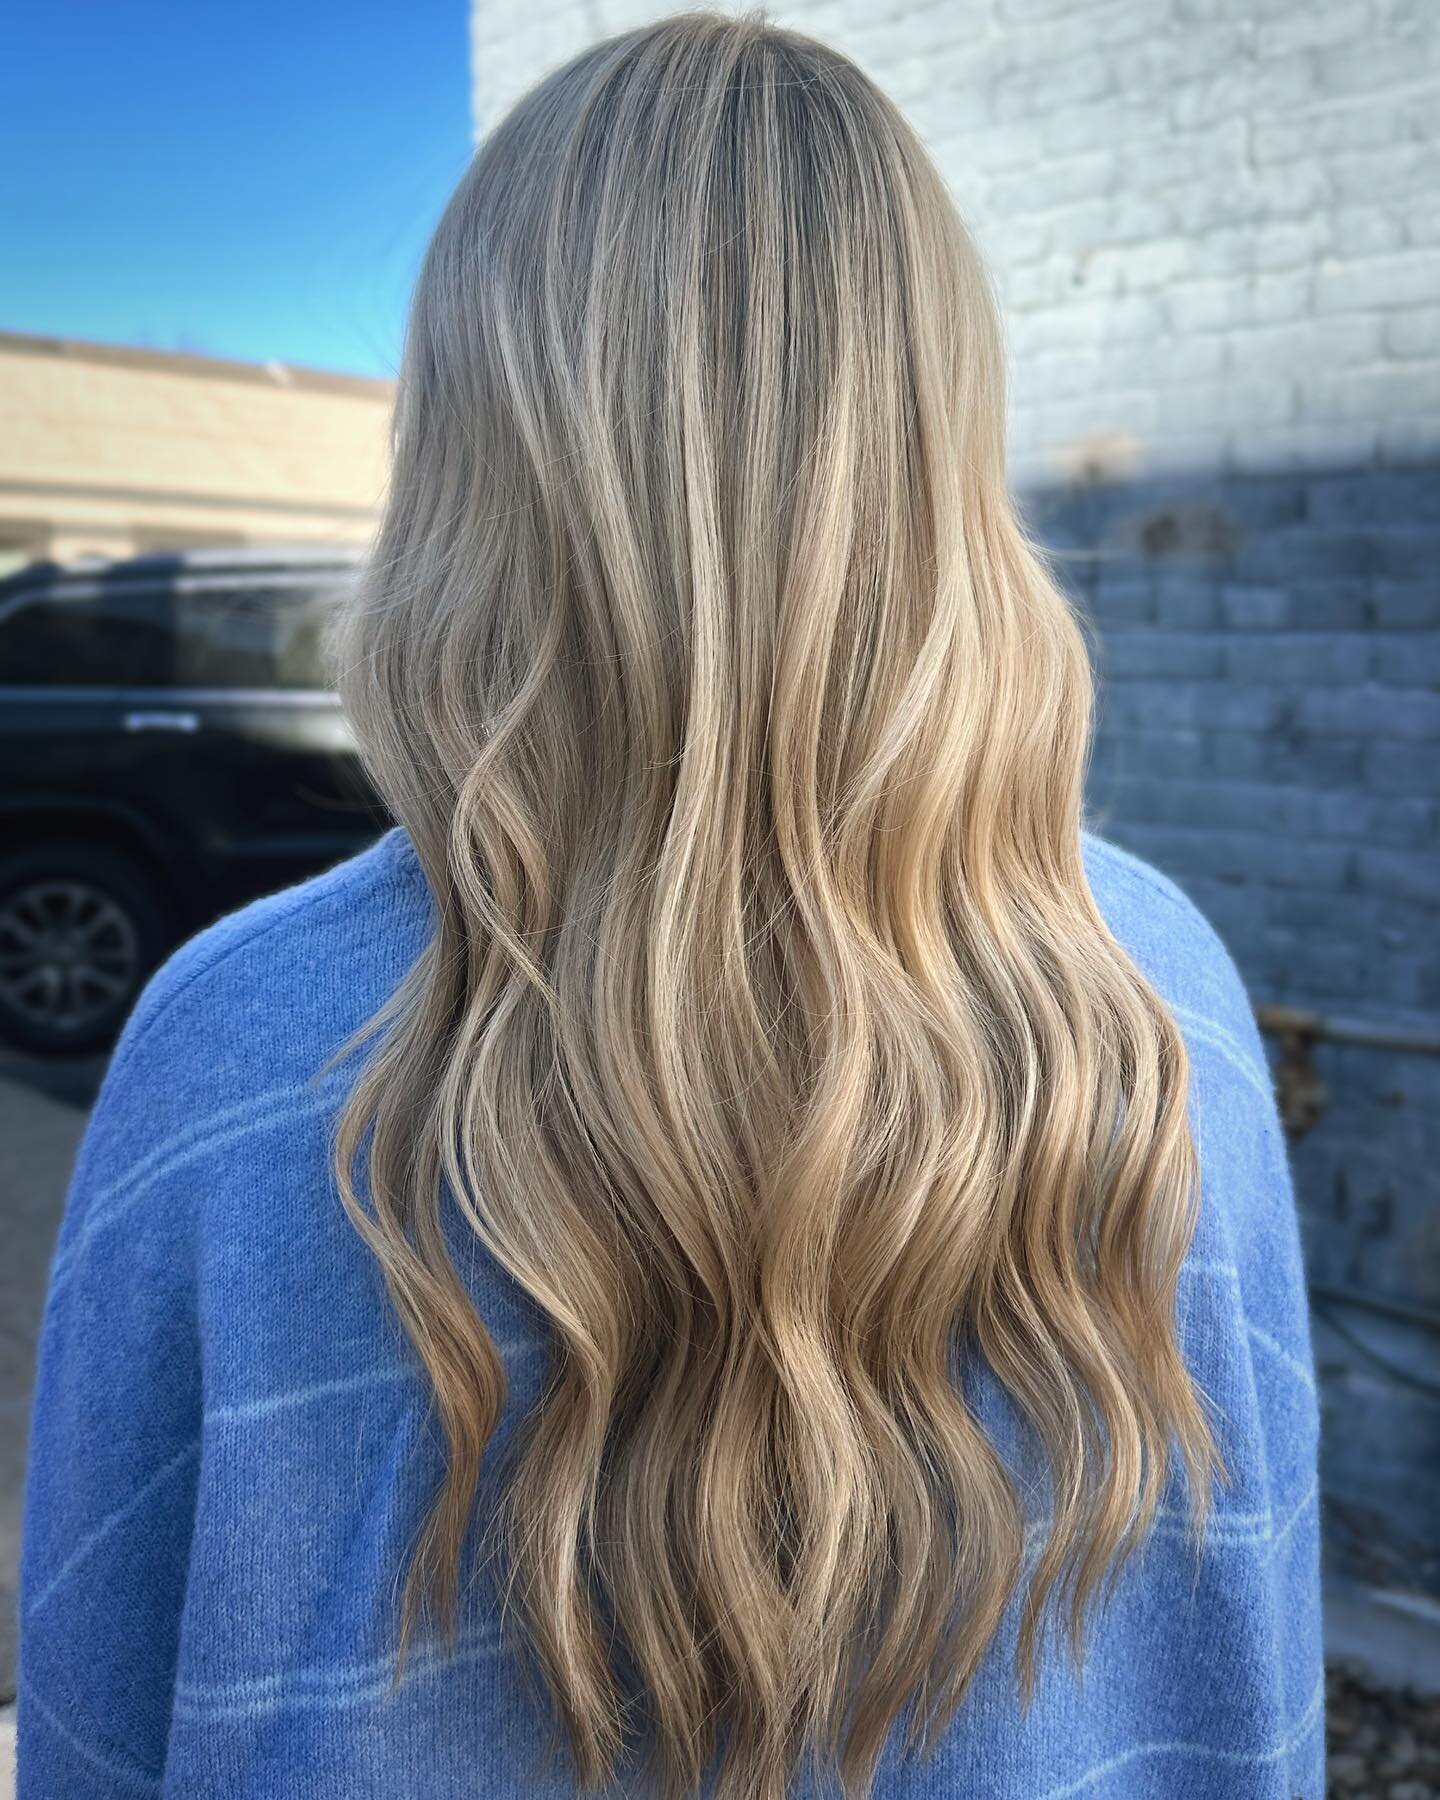 Bright creamy blondes are my fave. ✨

#chachas #chachaslex #lex #lexky #lexingtonky #lexingtonhairstylist #lexingtonhair #kyhair #kyhairstylist #universityofkentucky